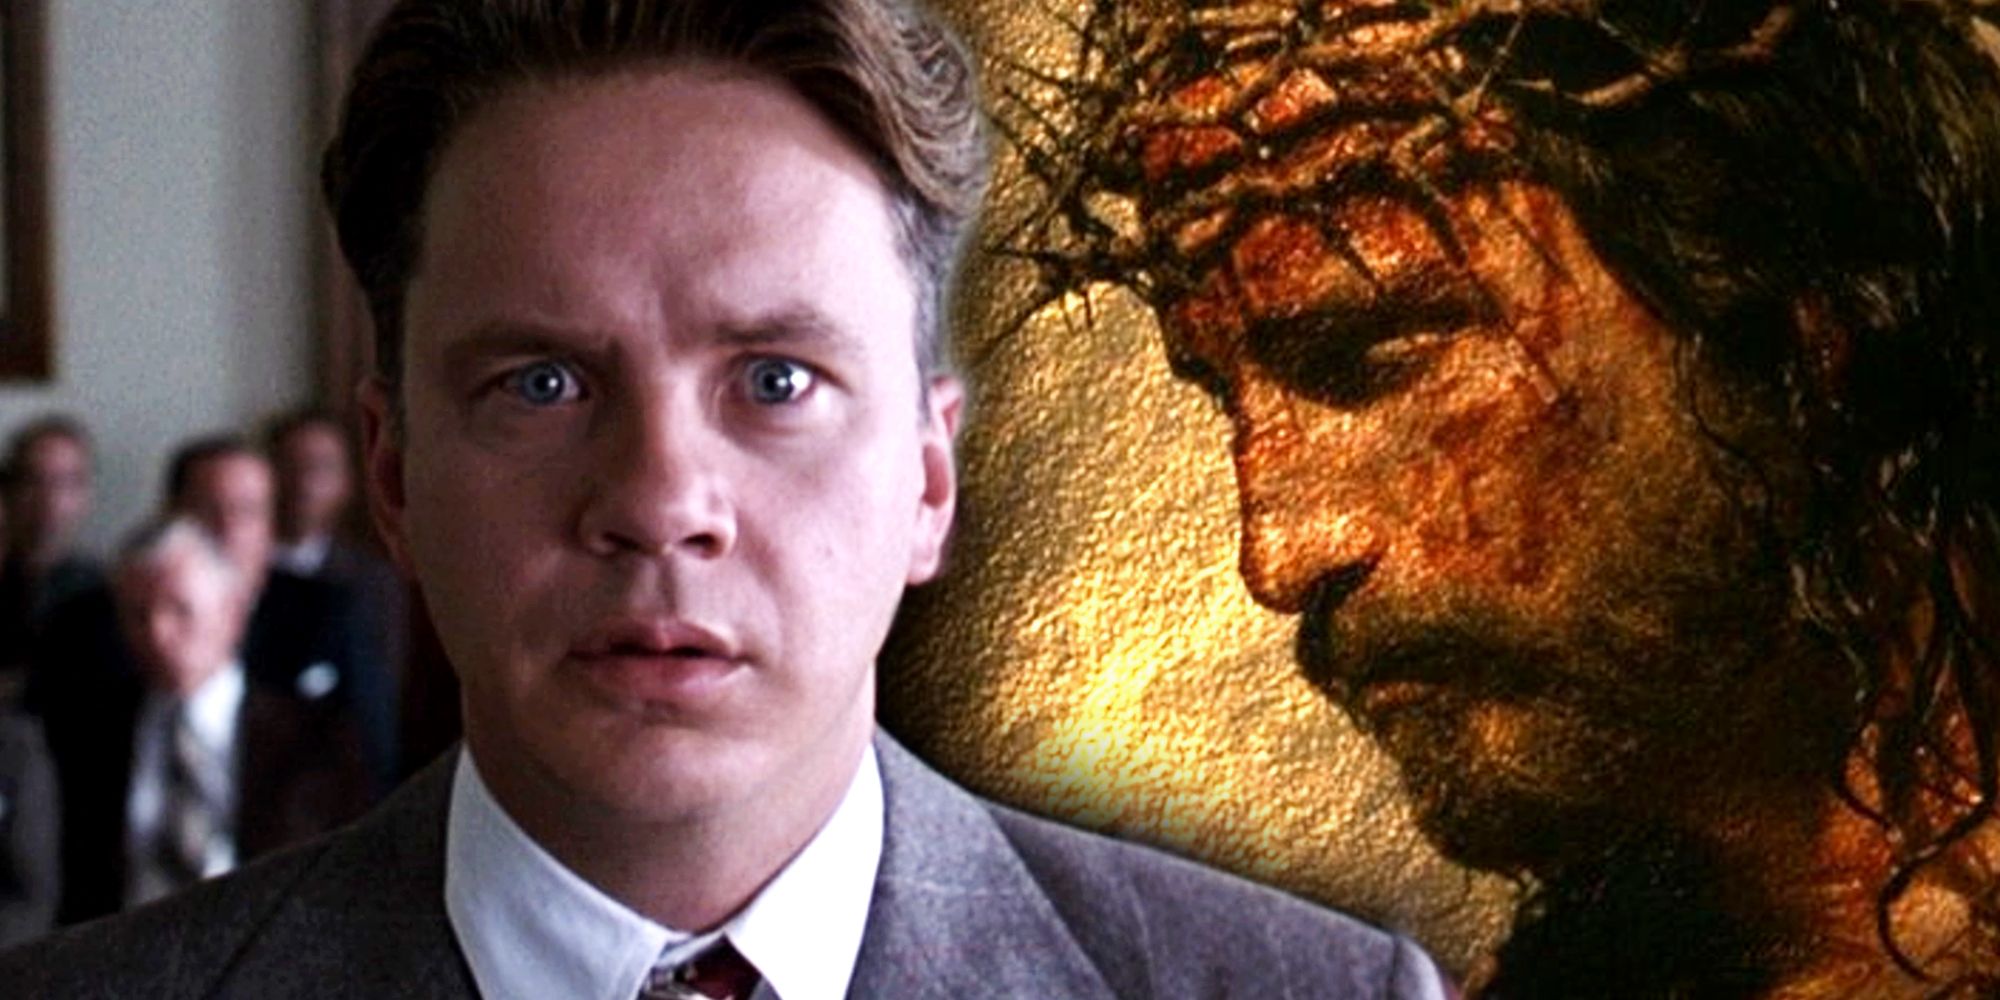 Andy dufresne historia real